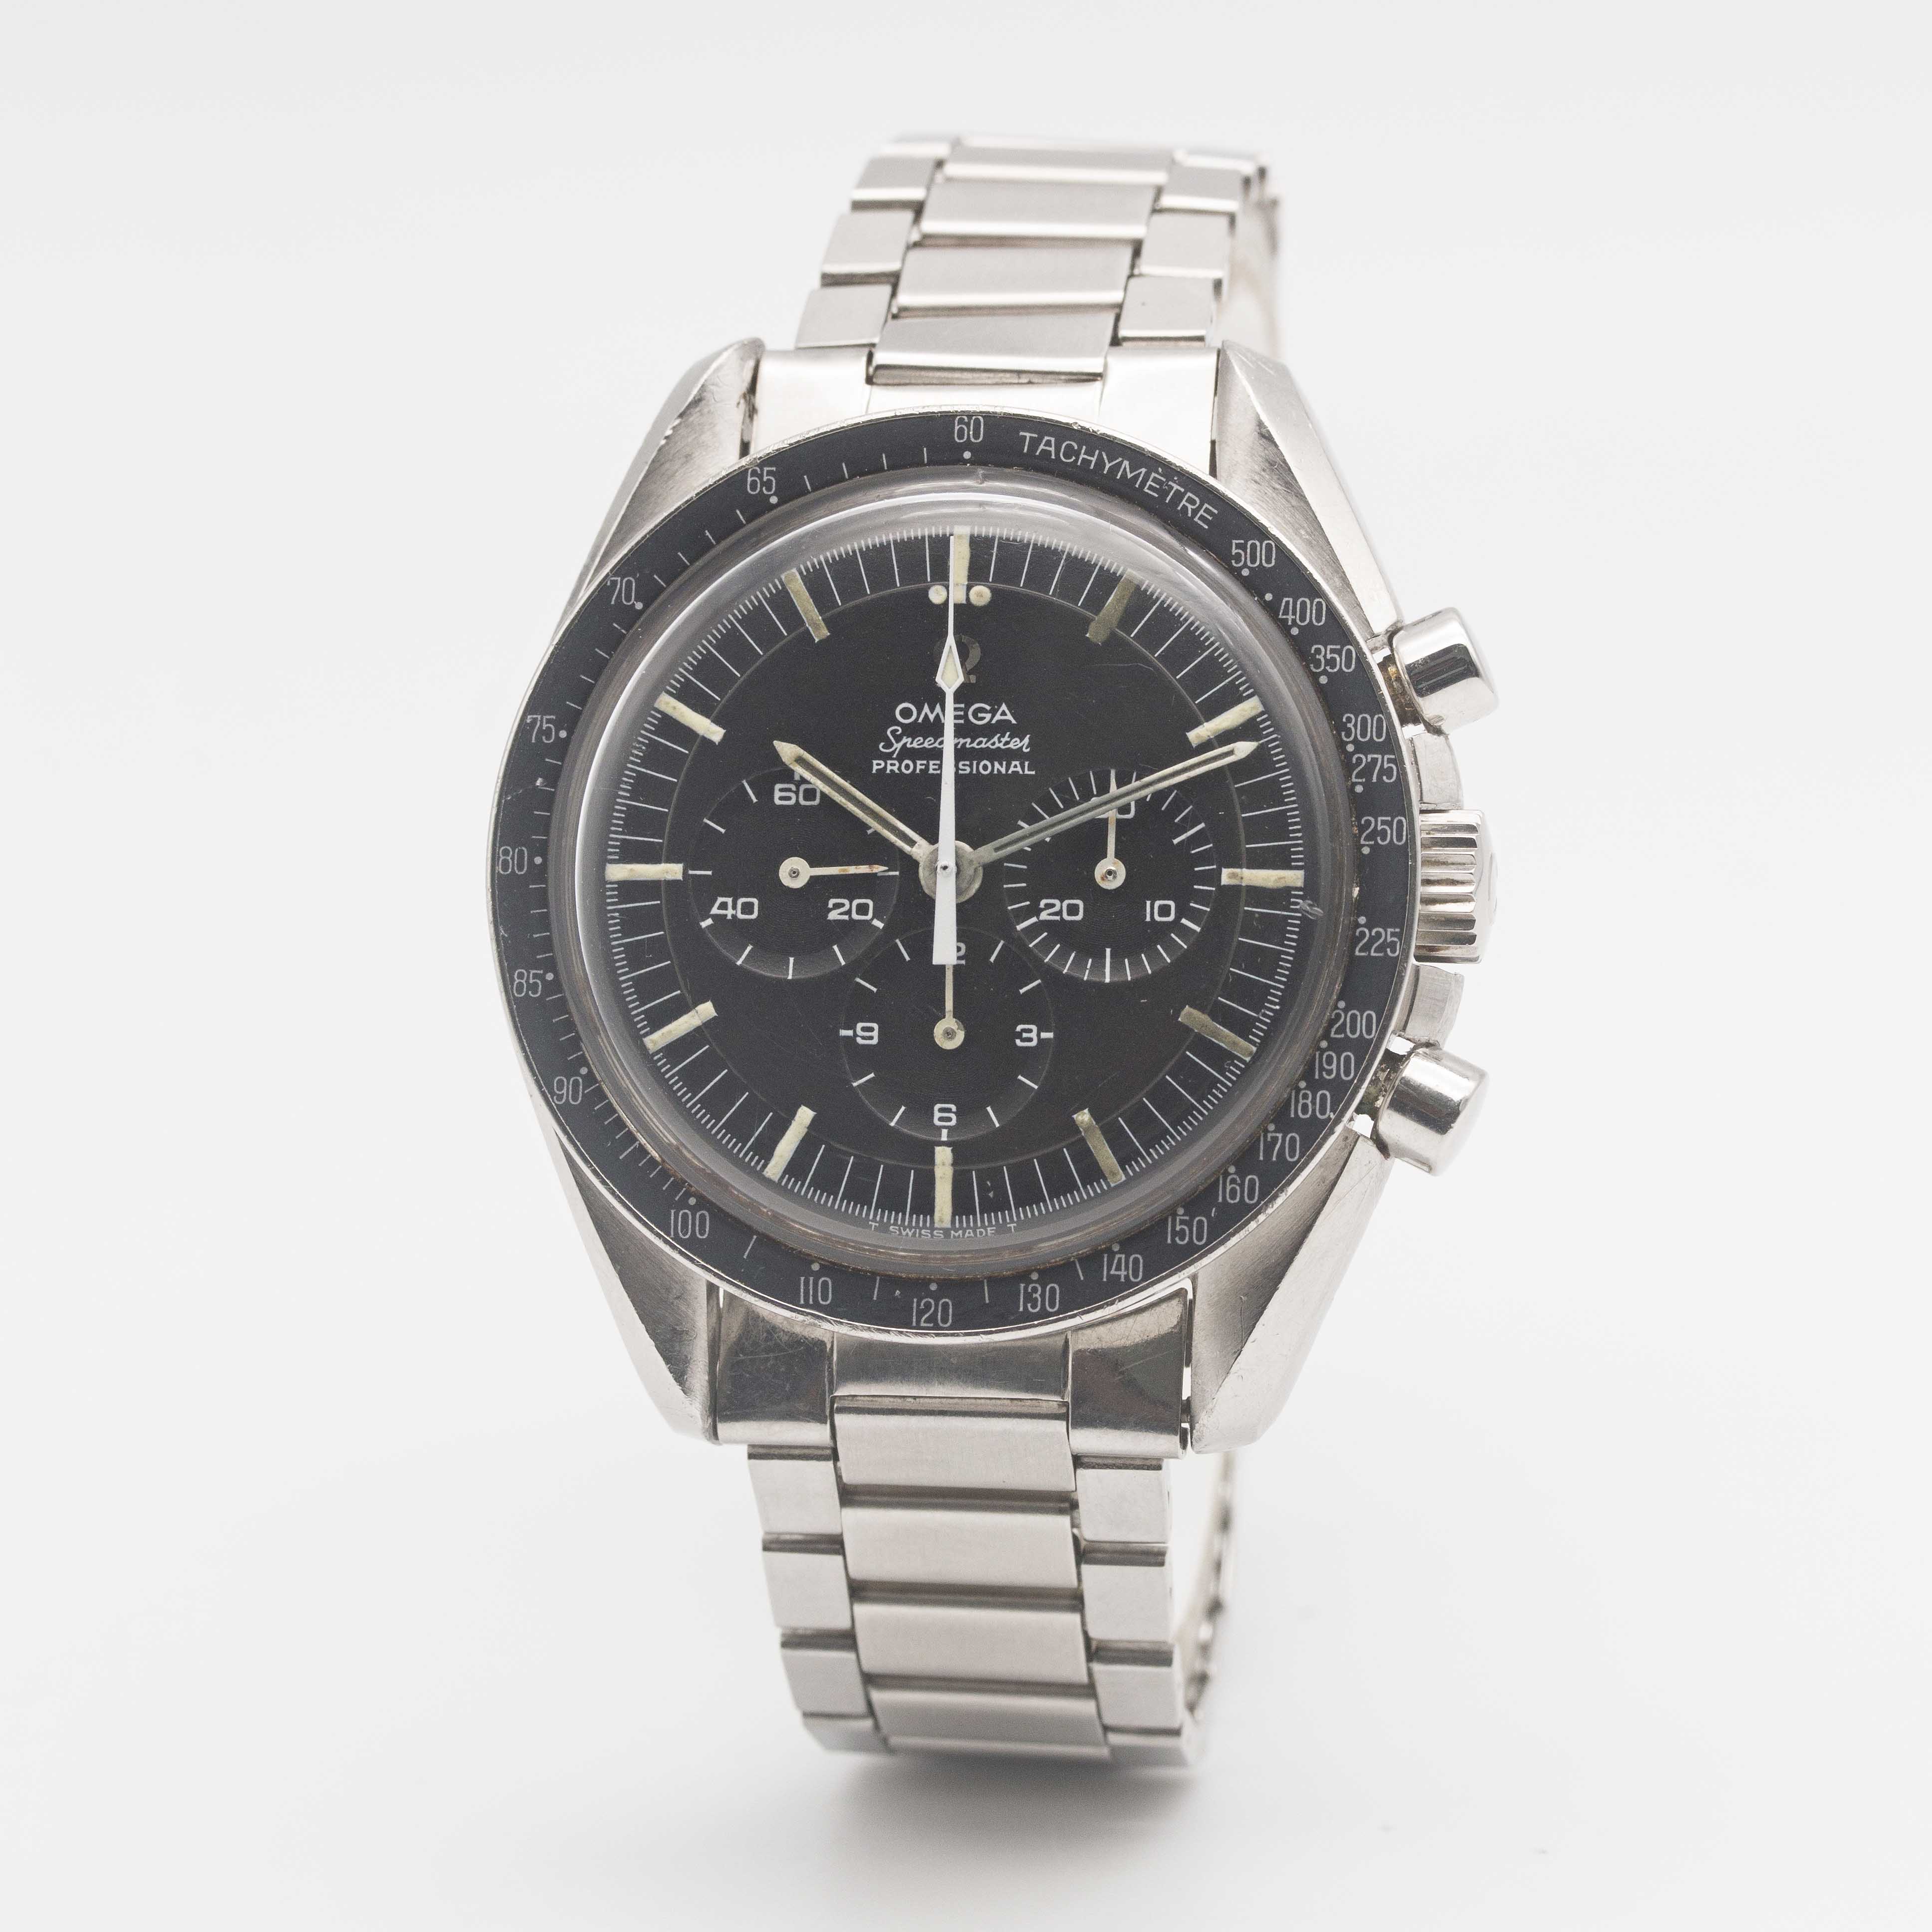 A GENTLEMAN'S STAINLESS STEEL OMEGA SPEEDMASTER PROFESSIONAL "PRE MOON" CHRONOGRAPH BRACELET WATCH - Image 4 of 11